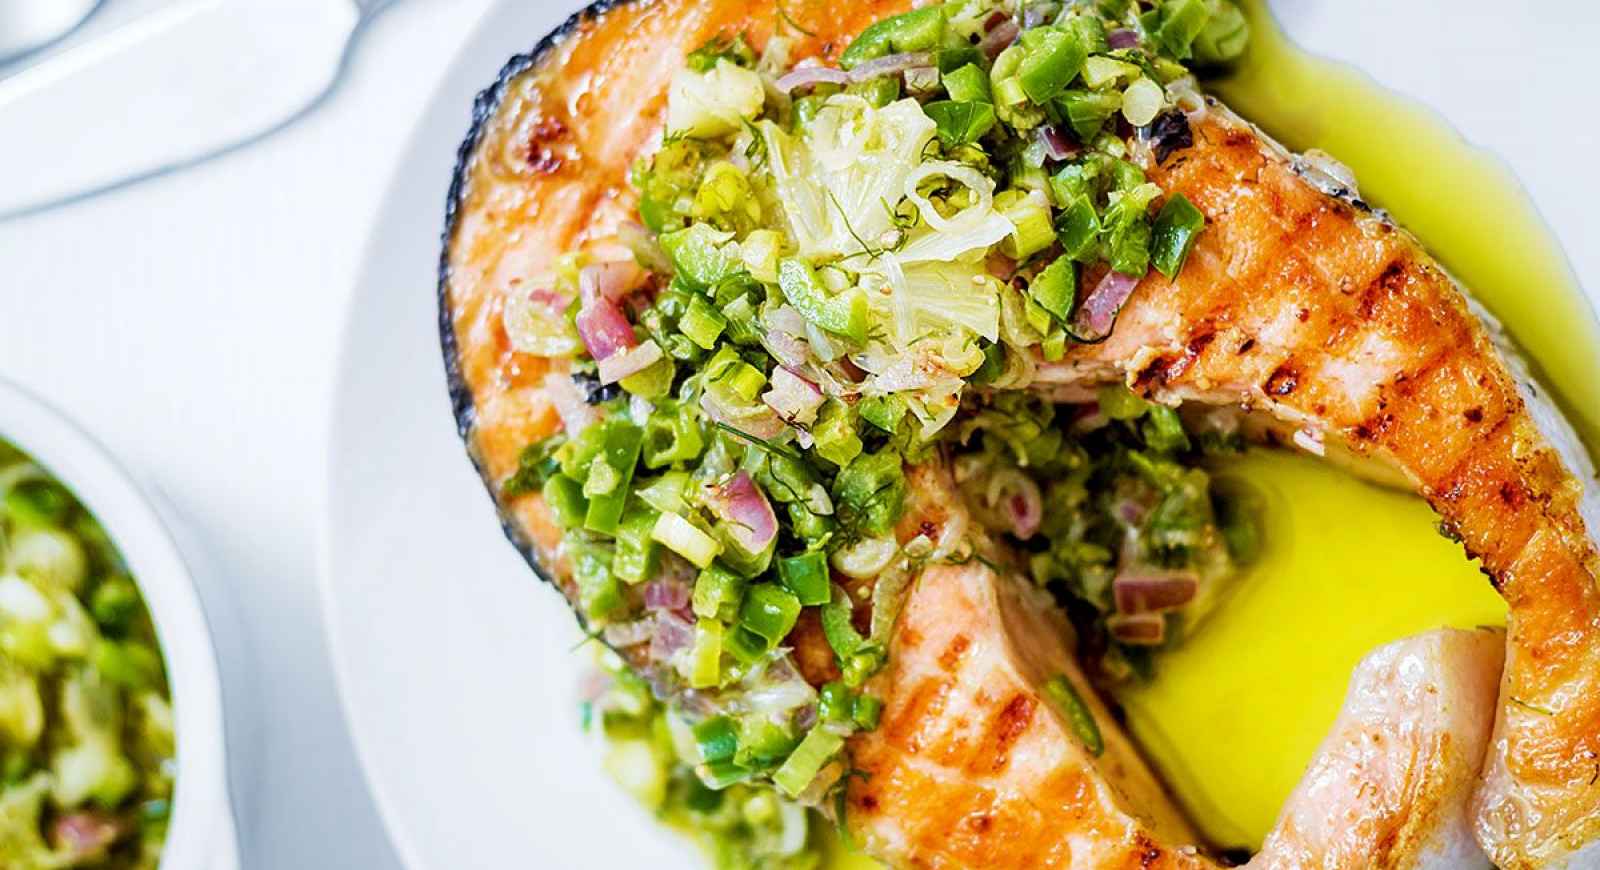 Grilled Salmon Steaks Recipe With Jalapeno Salsa Eatwell101